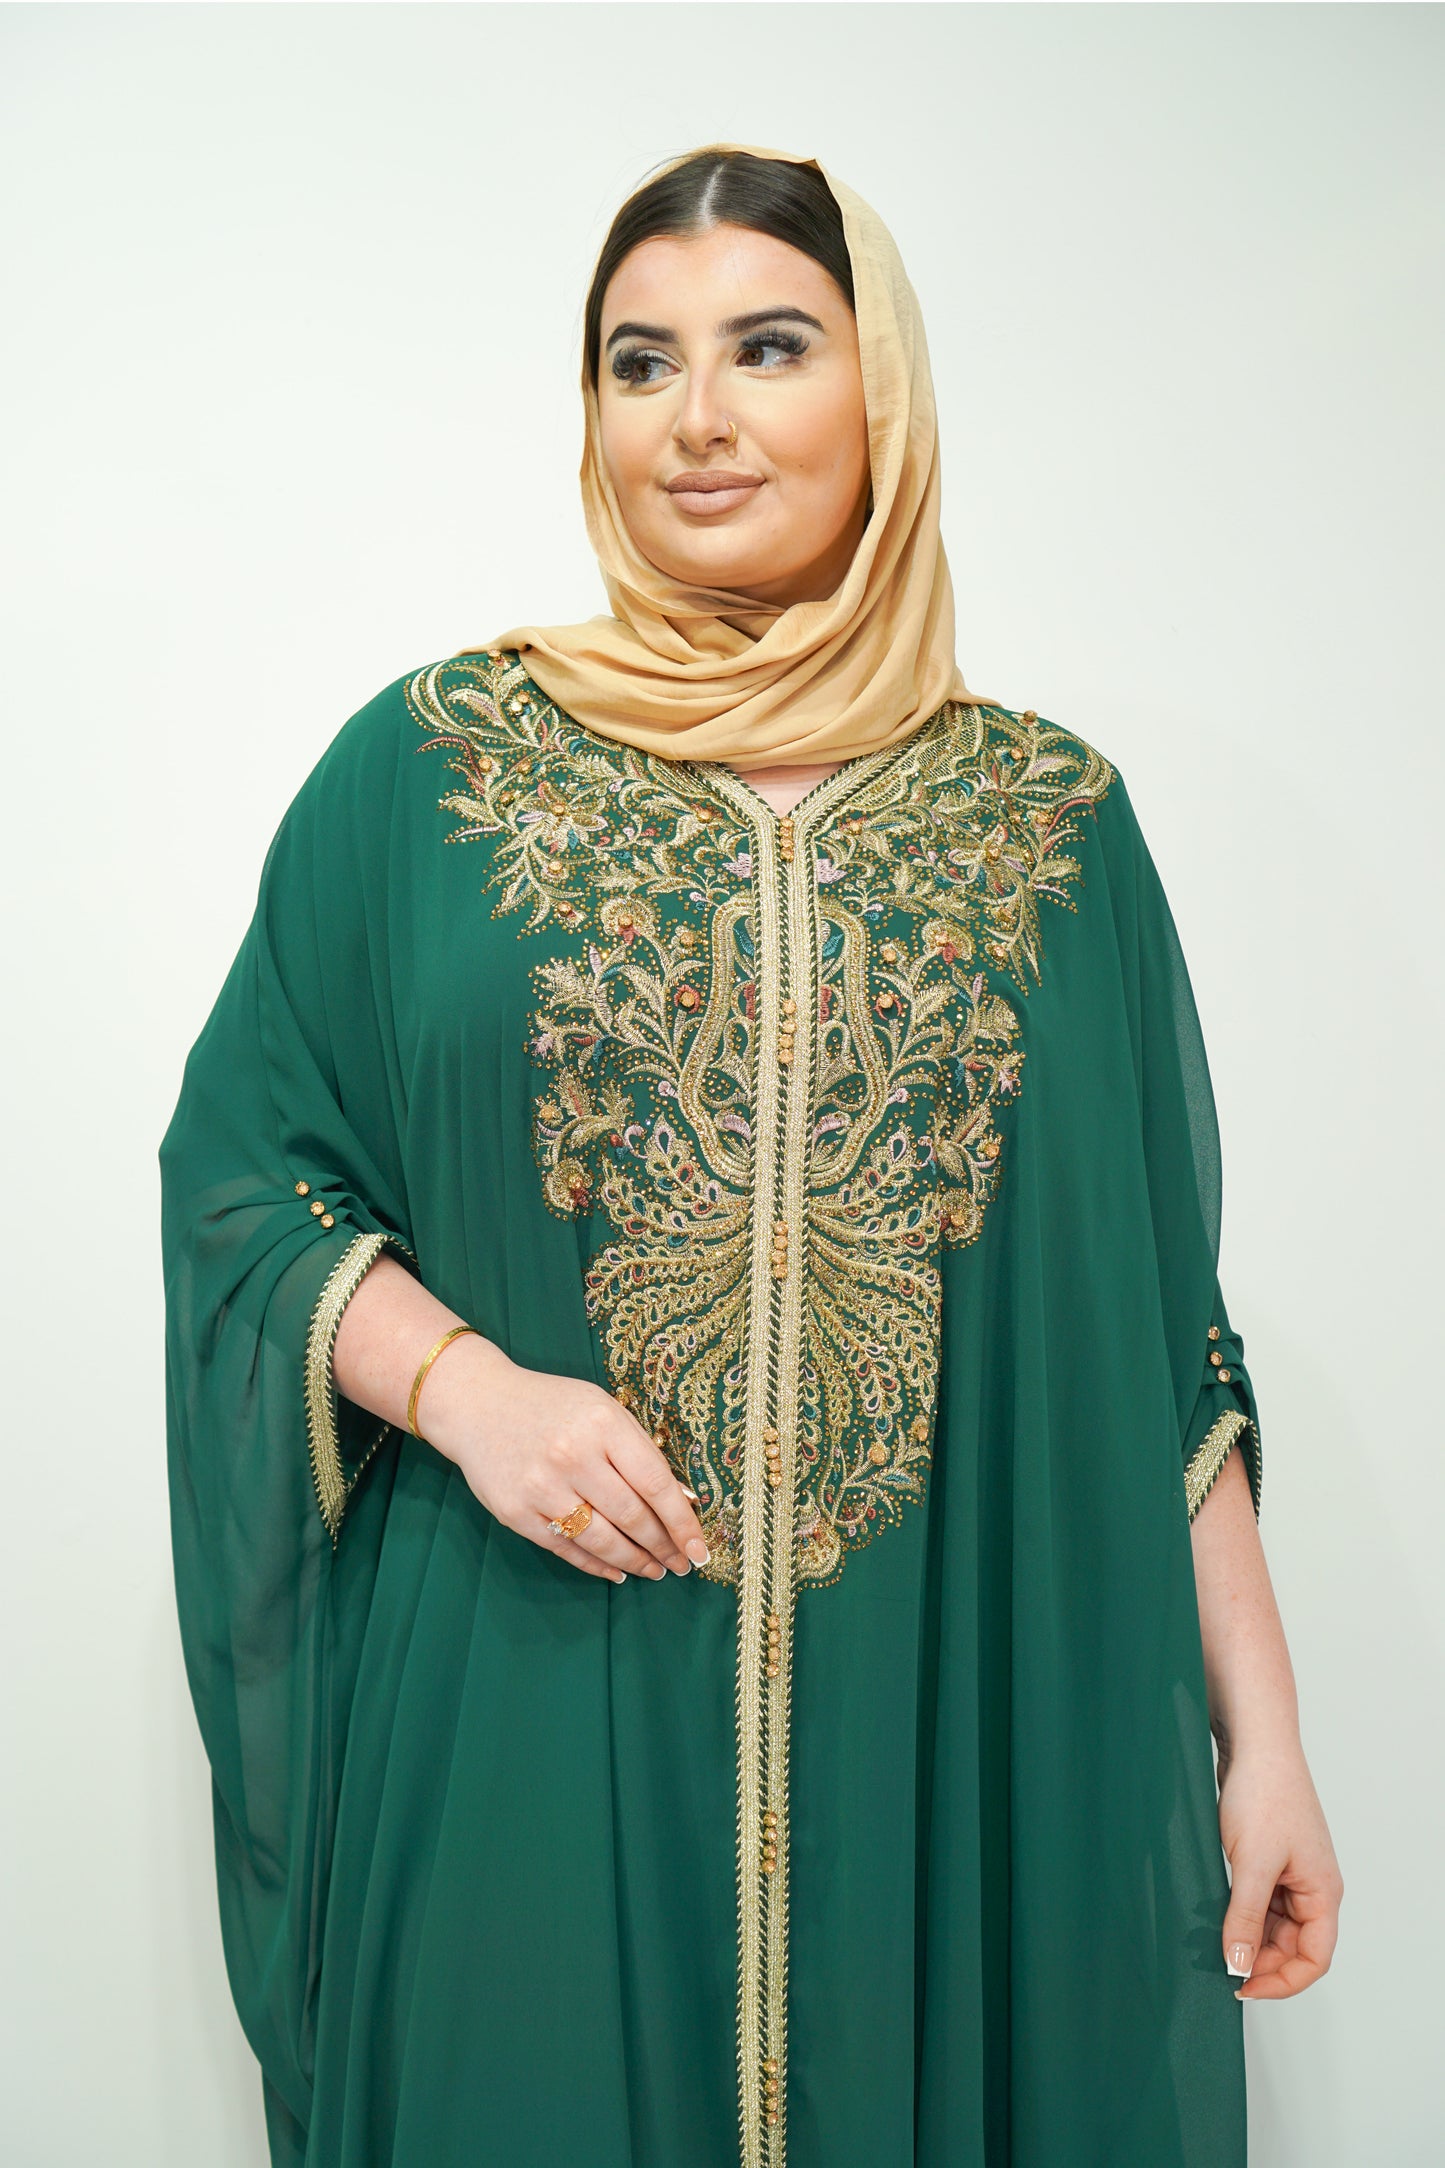 Bottle Green Chiffon Farasha Abaya with Exquisite Embroidery and Stone Accents